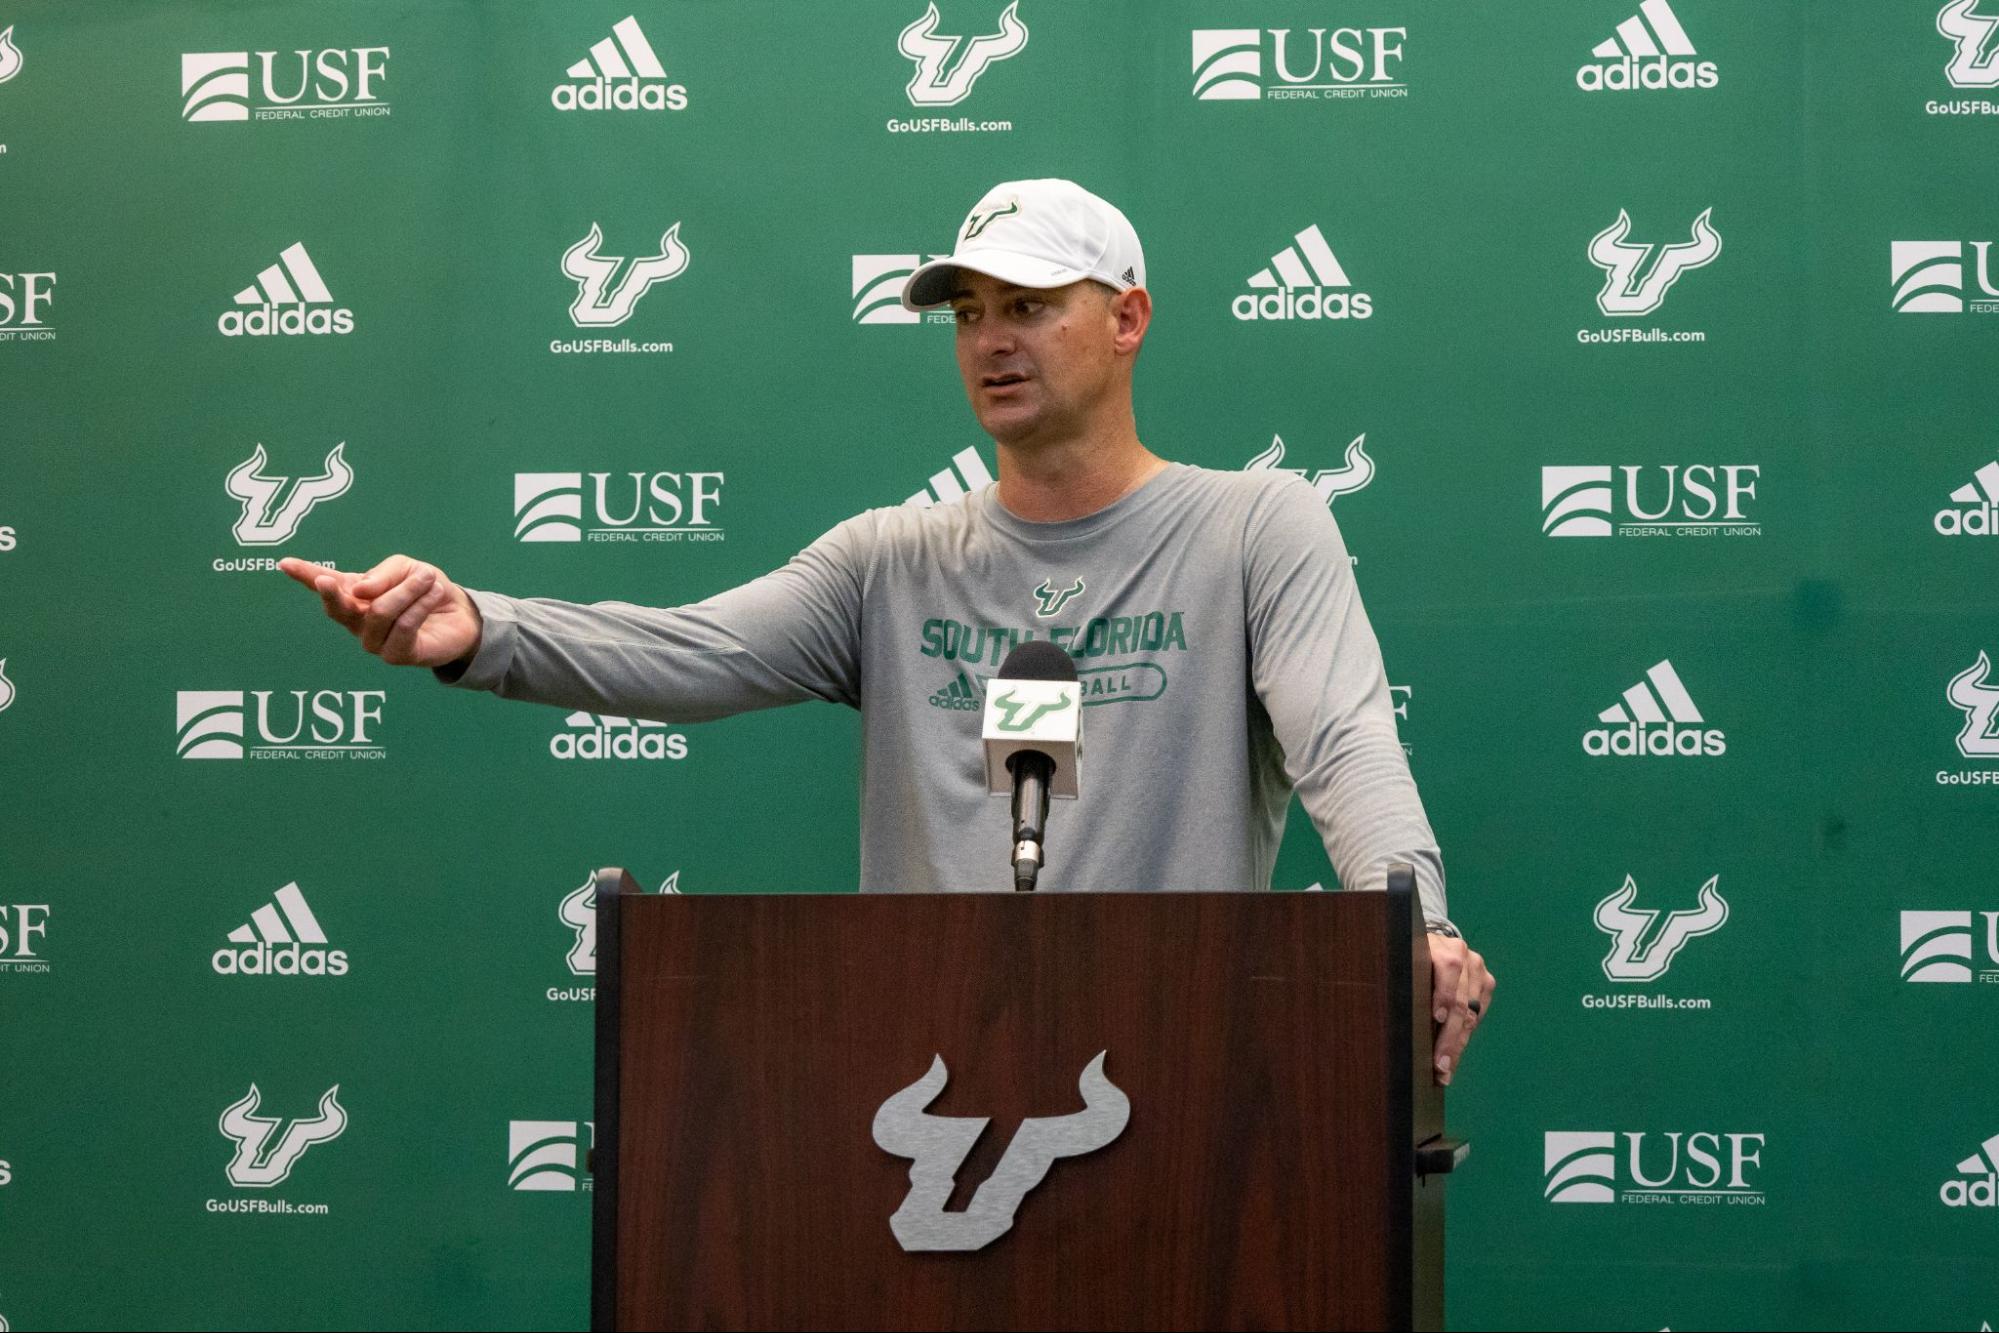 USF needs to fix its mistakes before playing Howard, Scott says